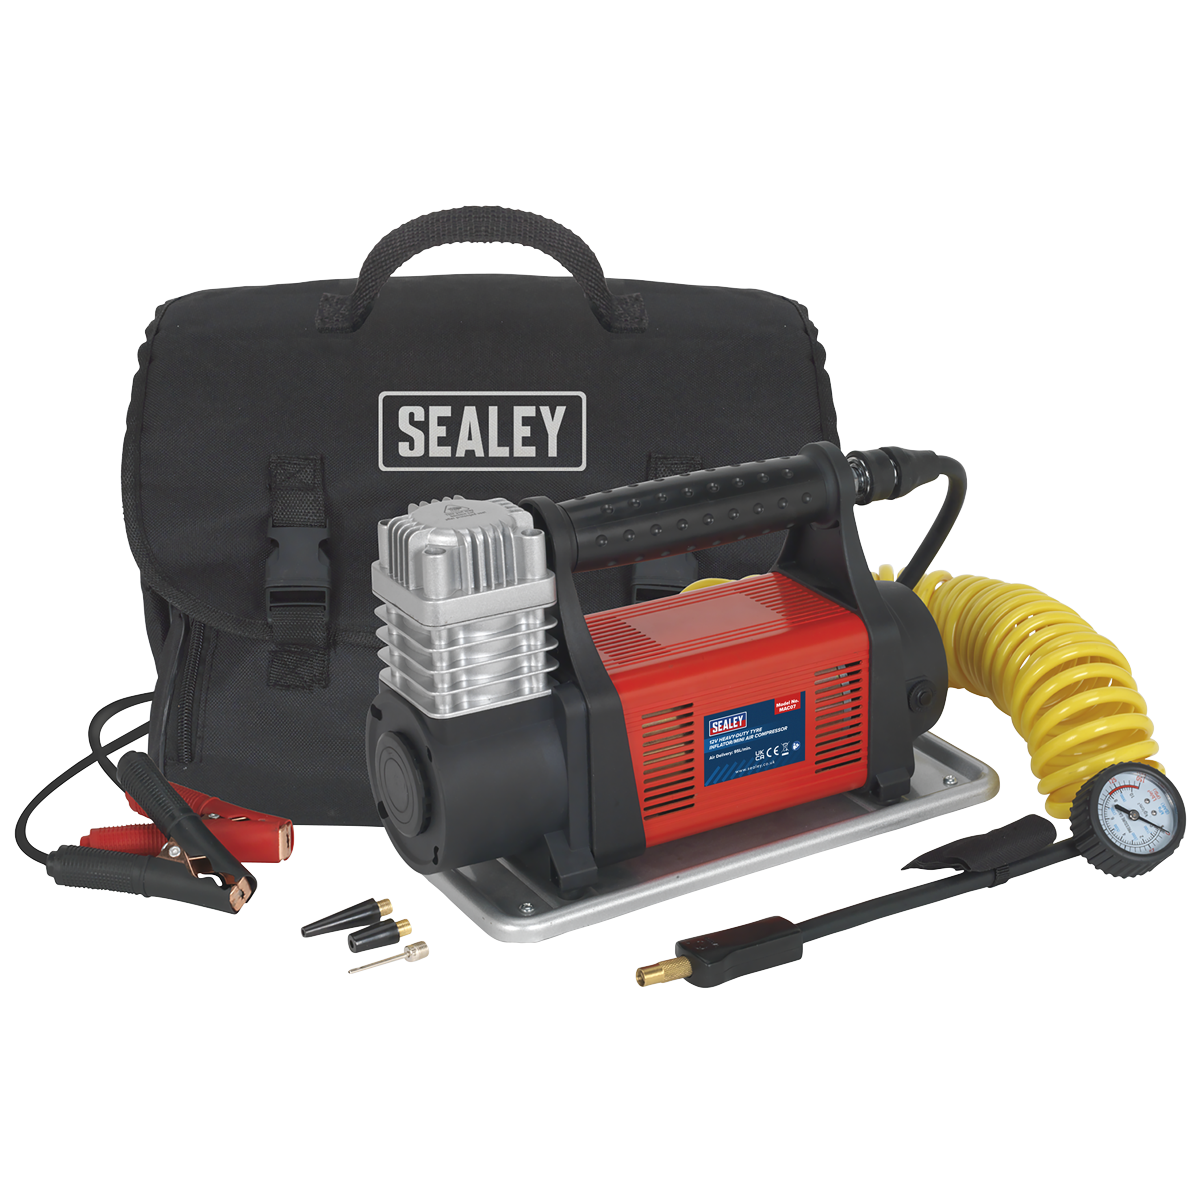 Sealey compact tyre inflator